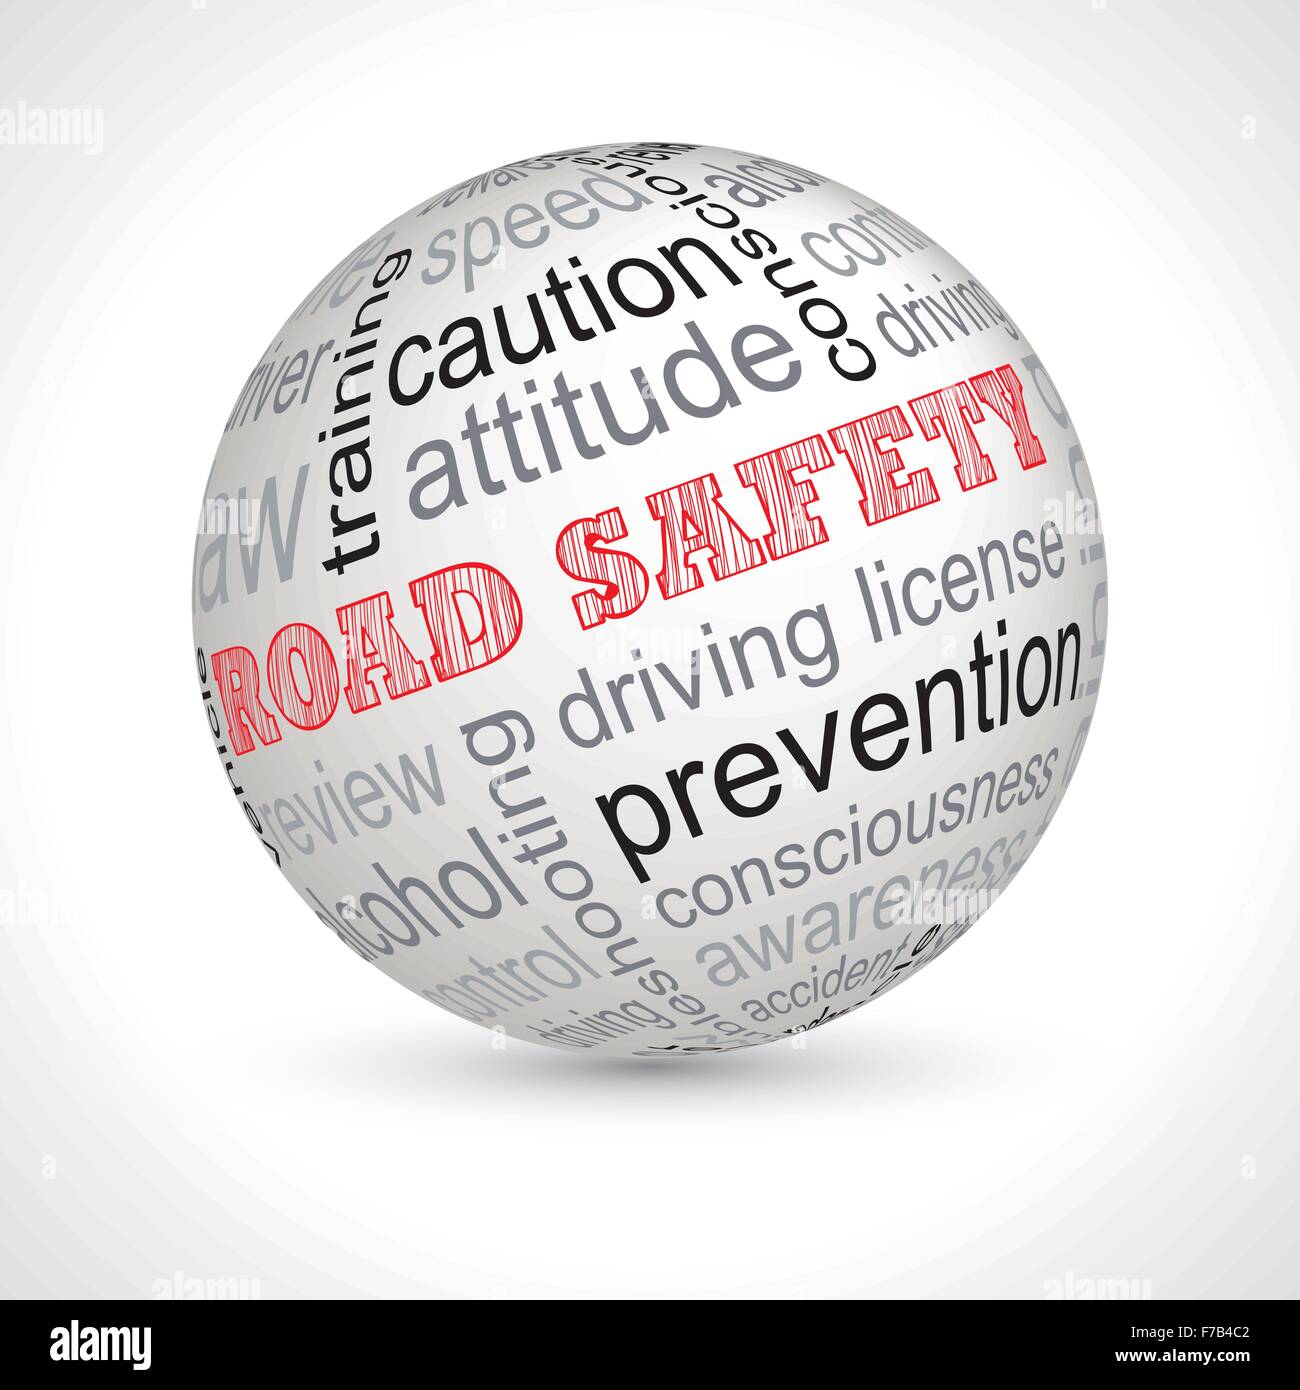 Road safety theme sphere with keywords full vector Stock Vector